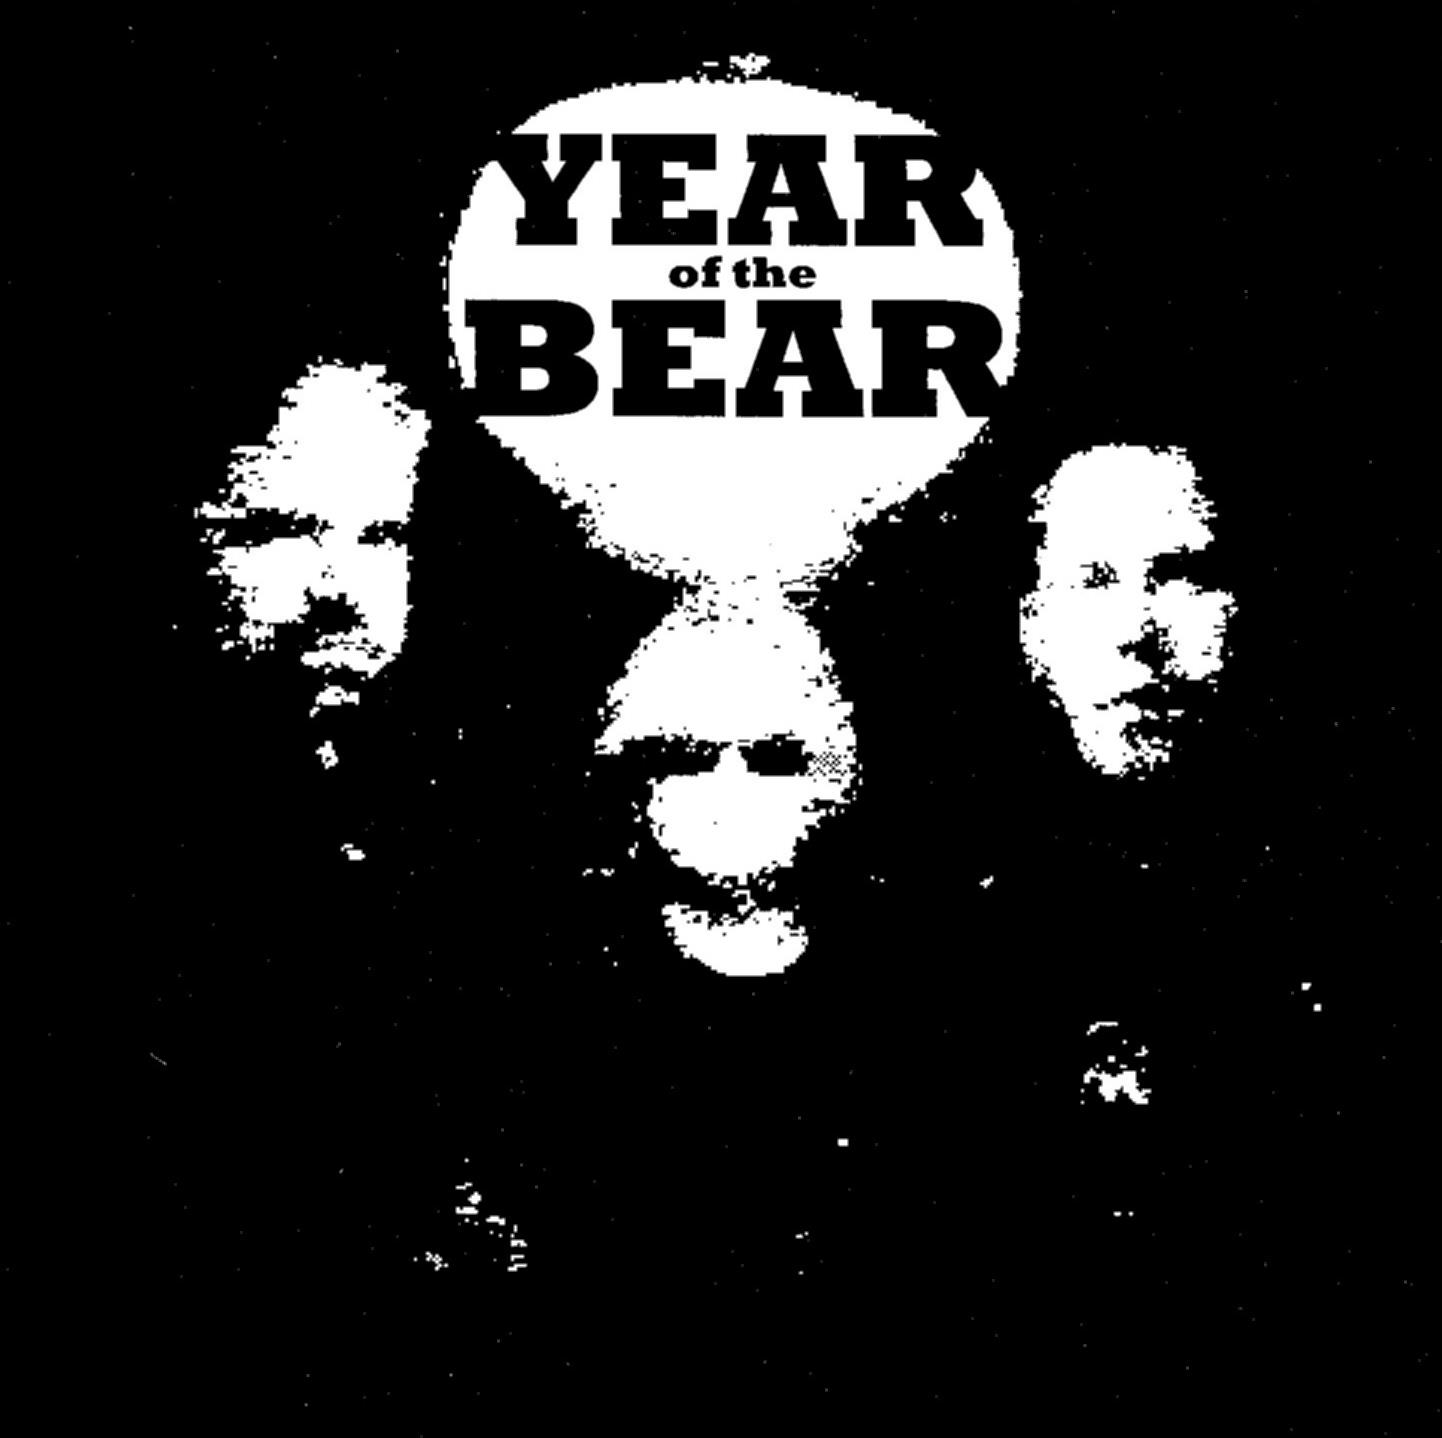 Year of the Bear!